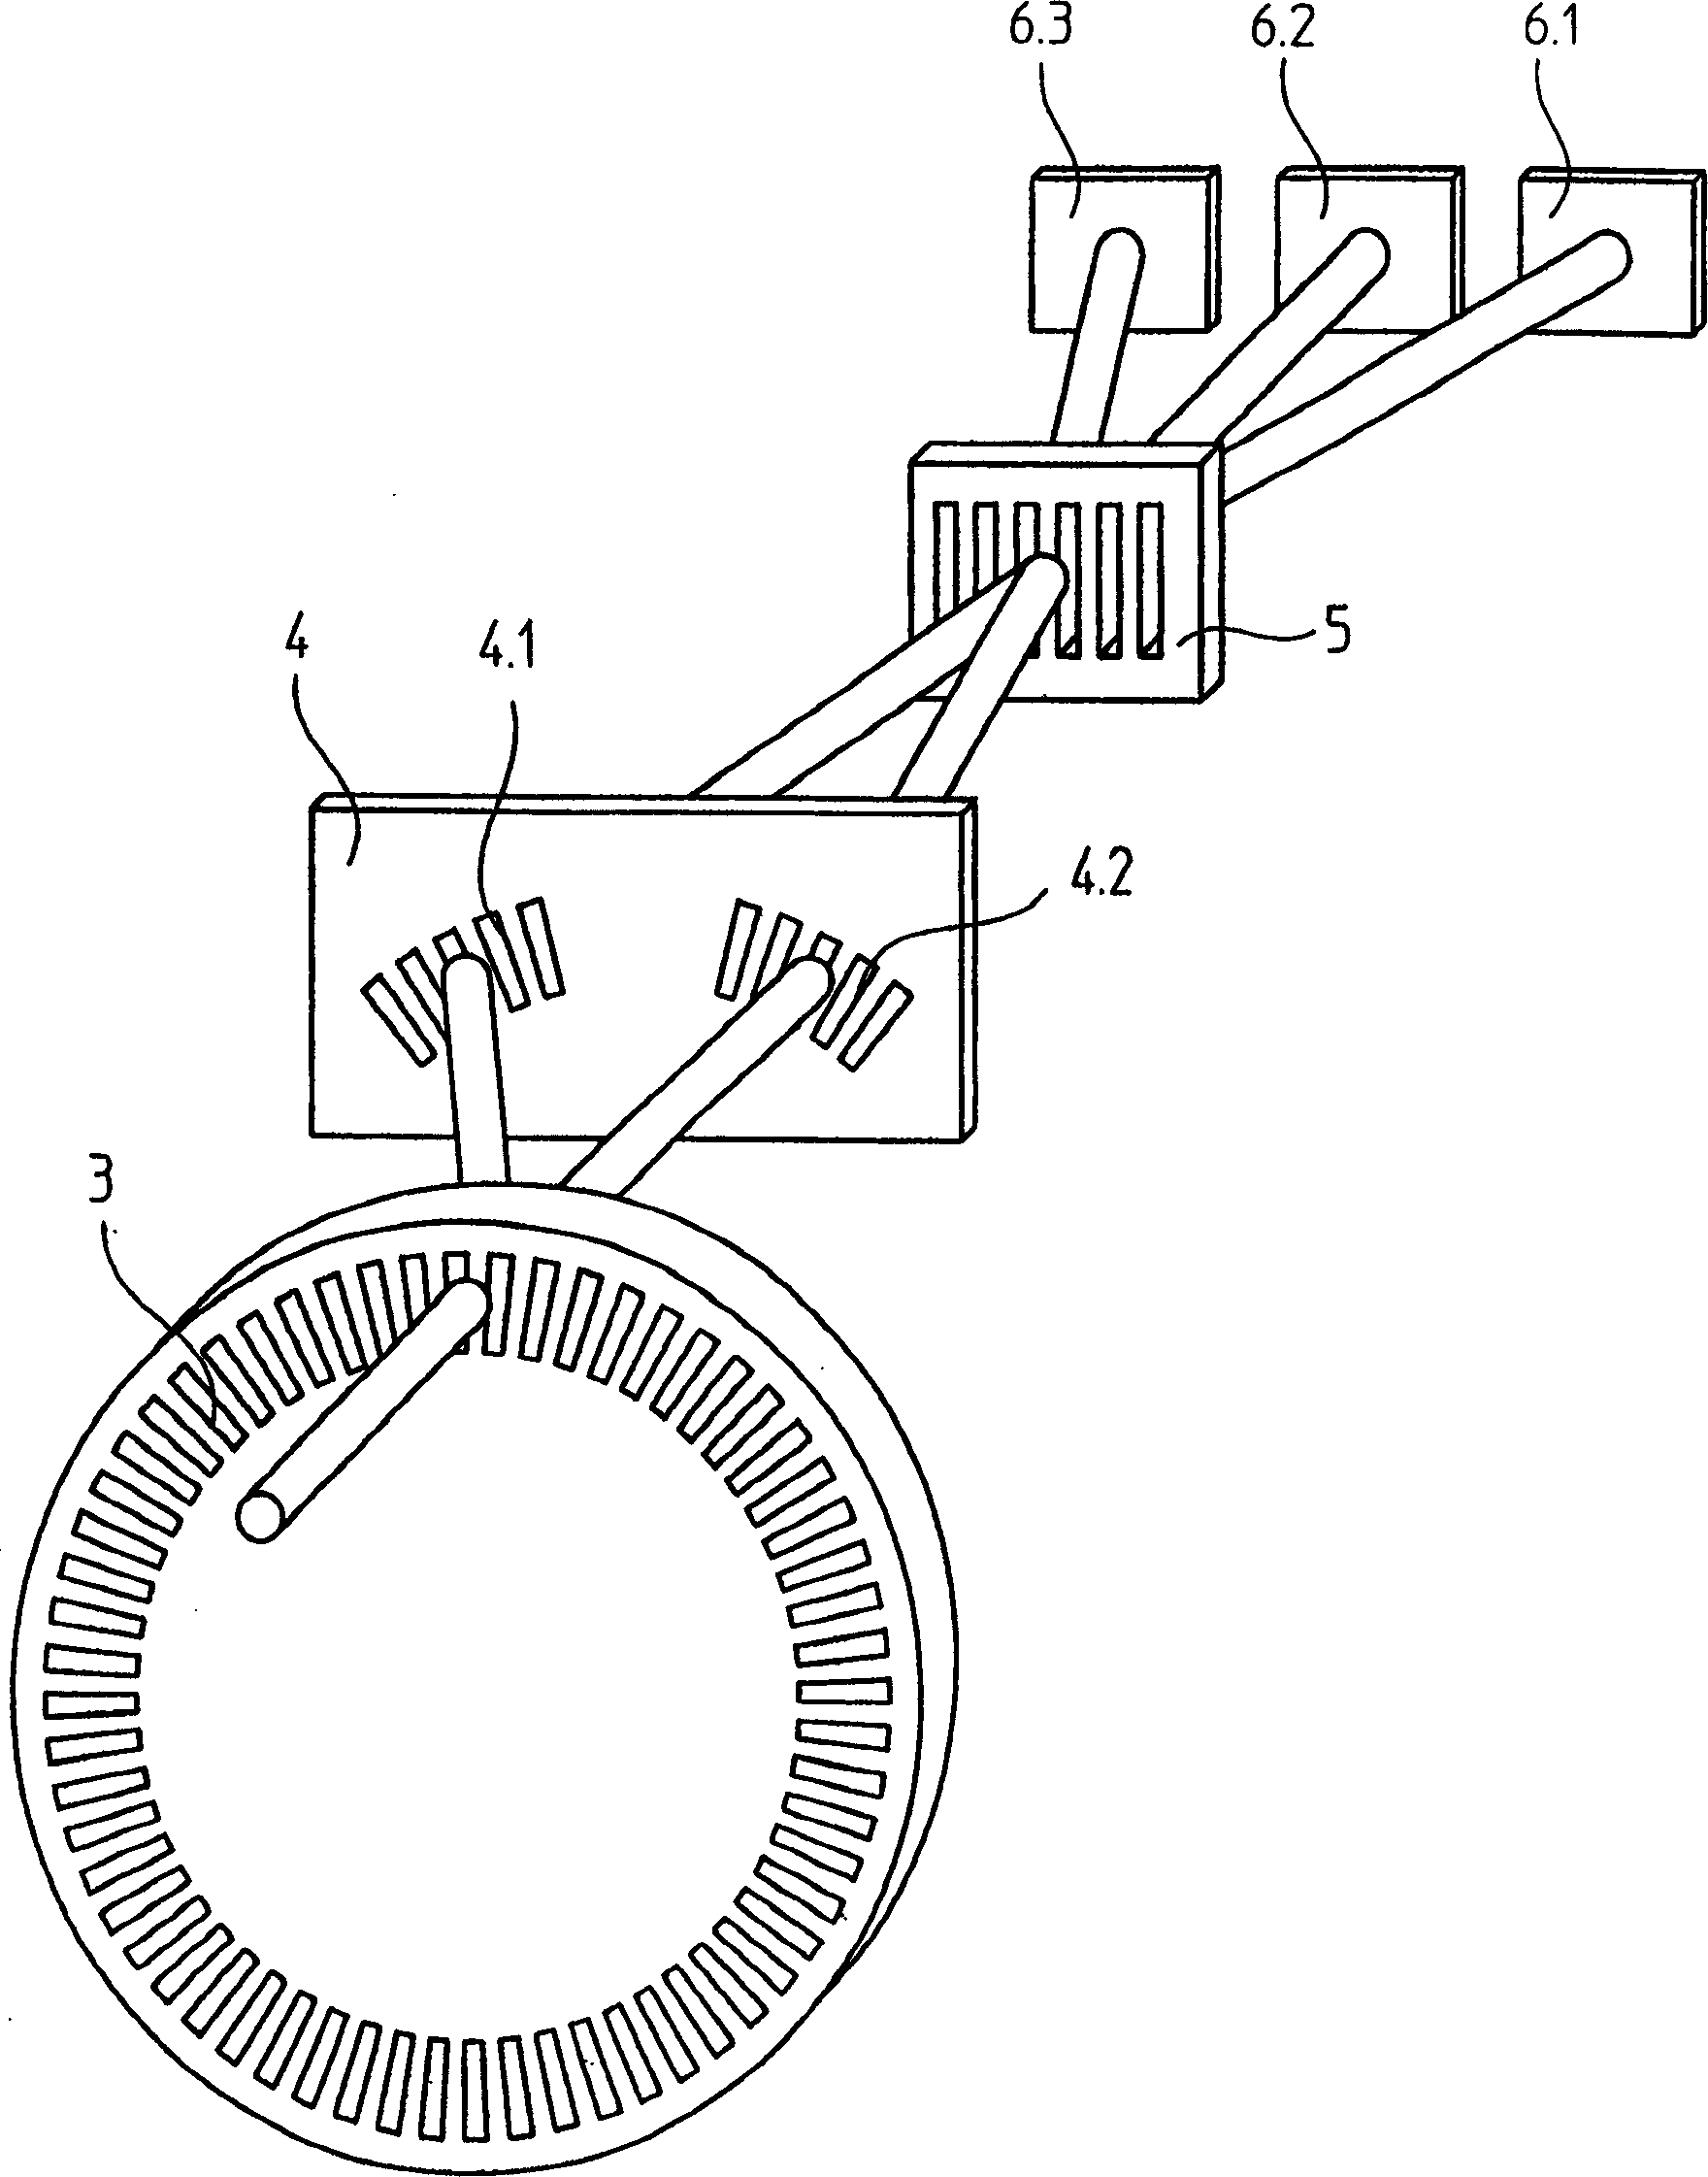 Interferential position measuring device